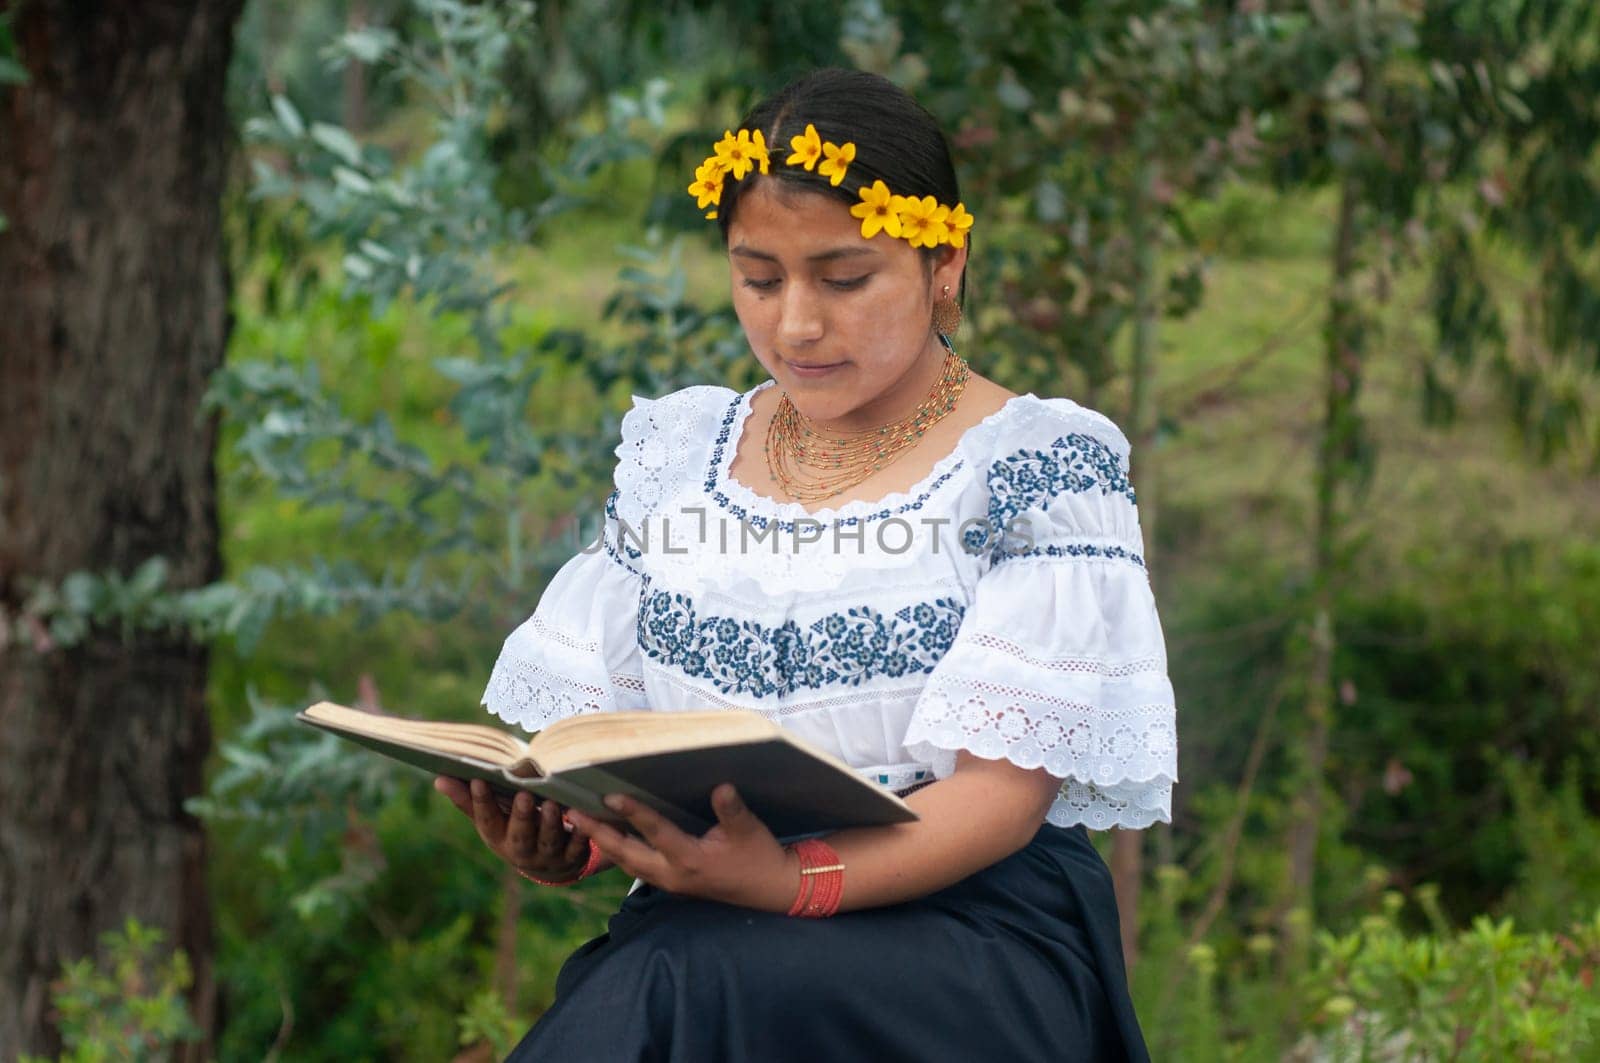 A captivating image of a woman in a flowing dress, completely engrossed in reading an unidentified book.